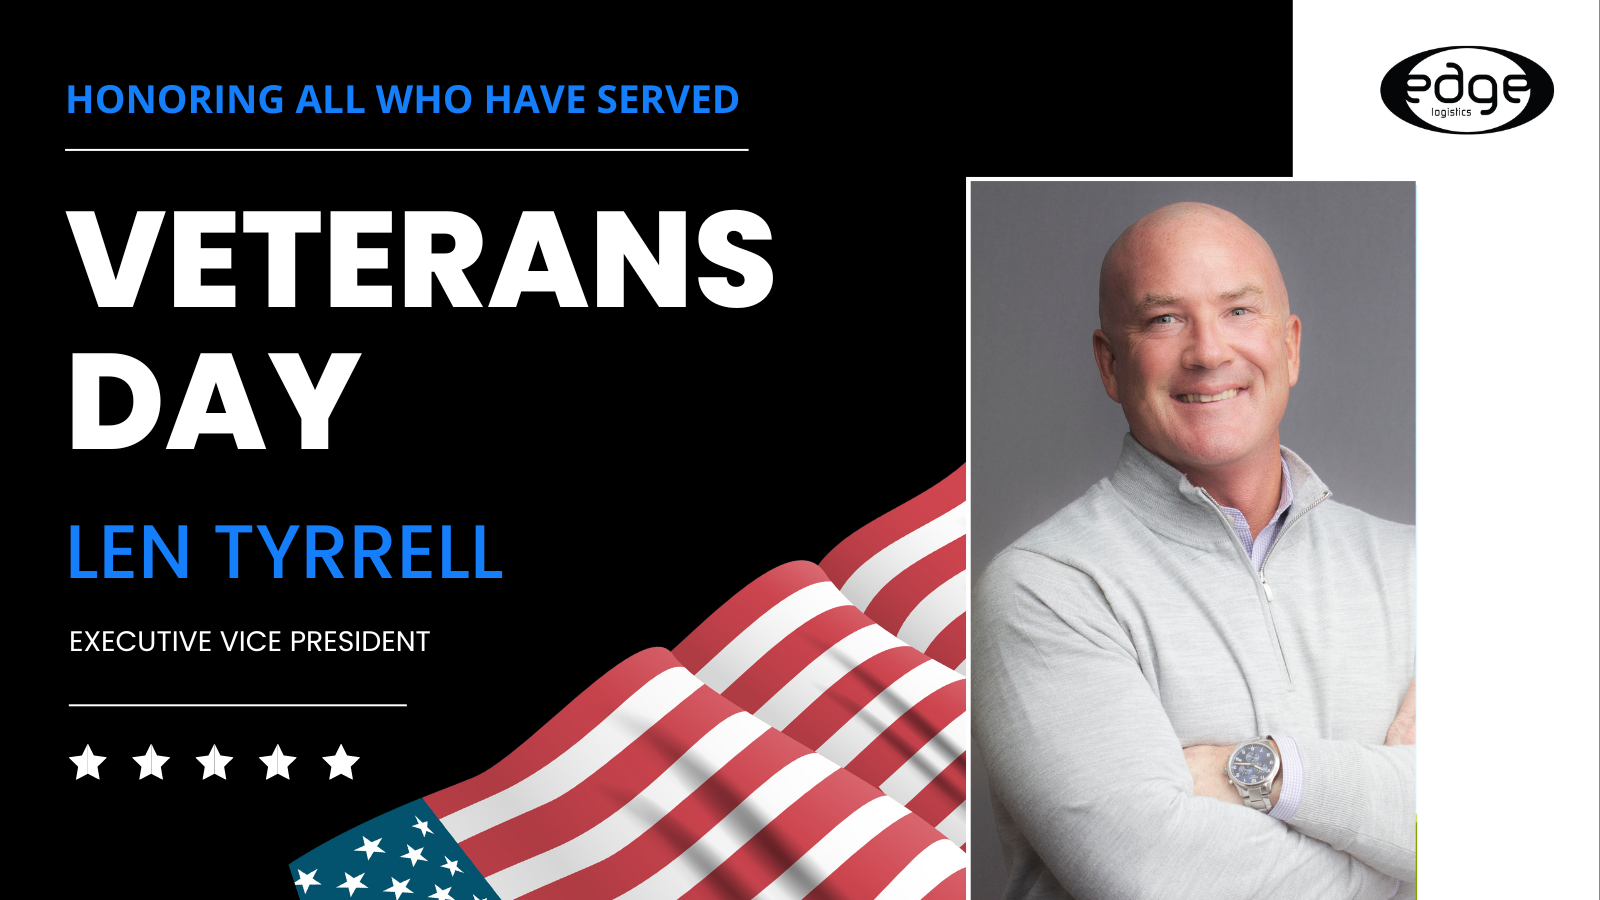 Veteran's Who Served In Our Industry: Meet Len Tyrrell, Executive Vice President of Edge Logistics